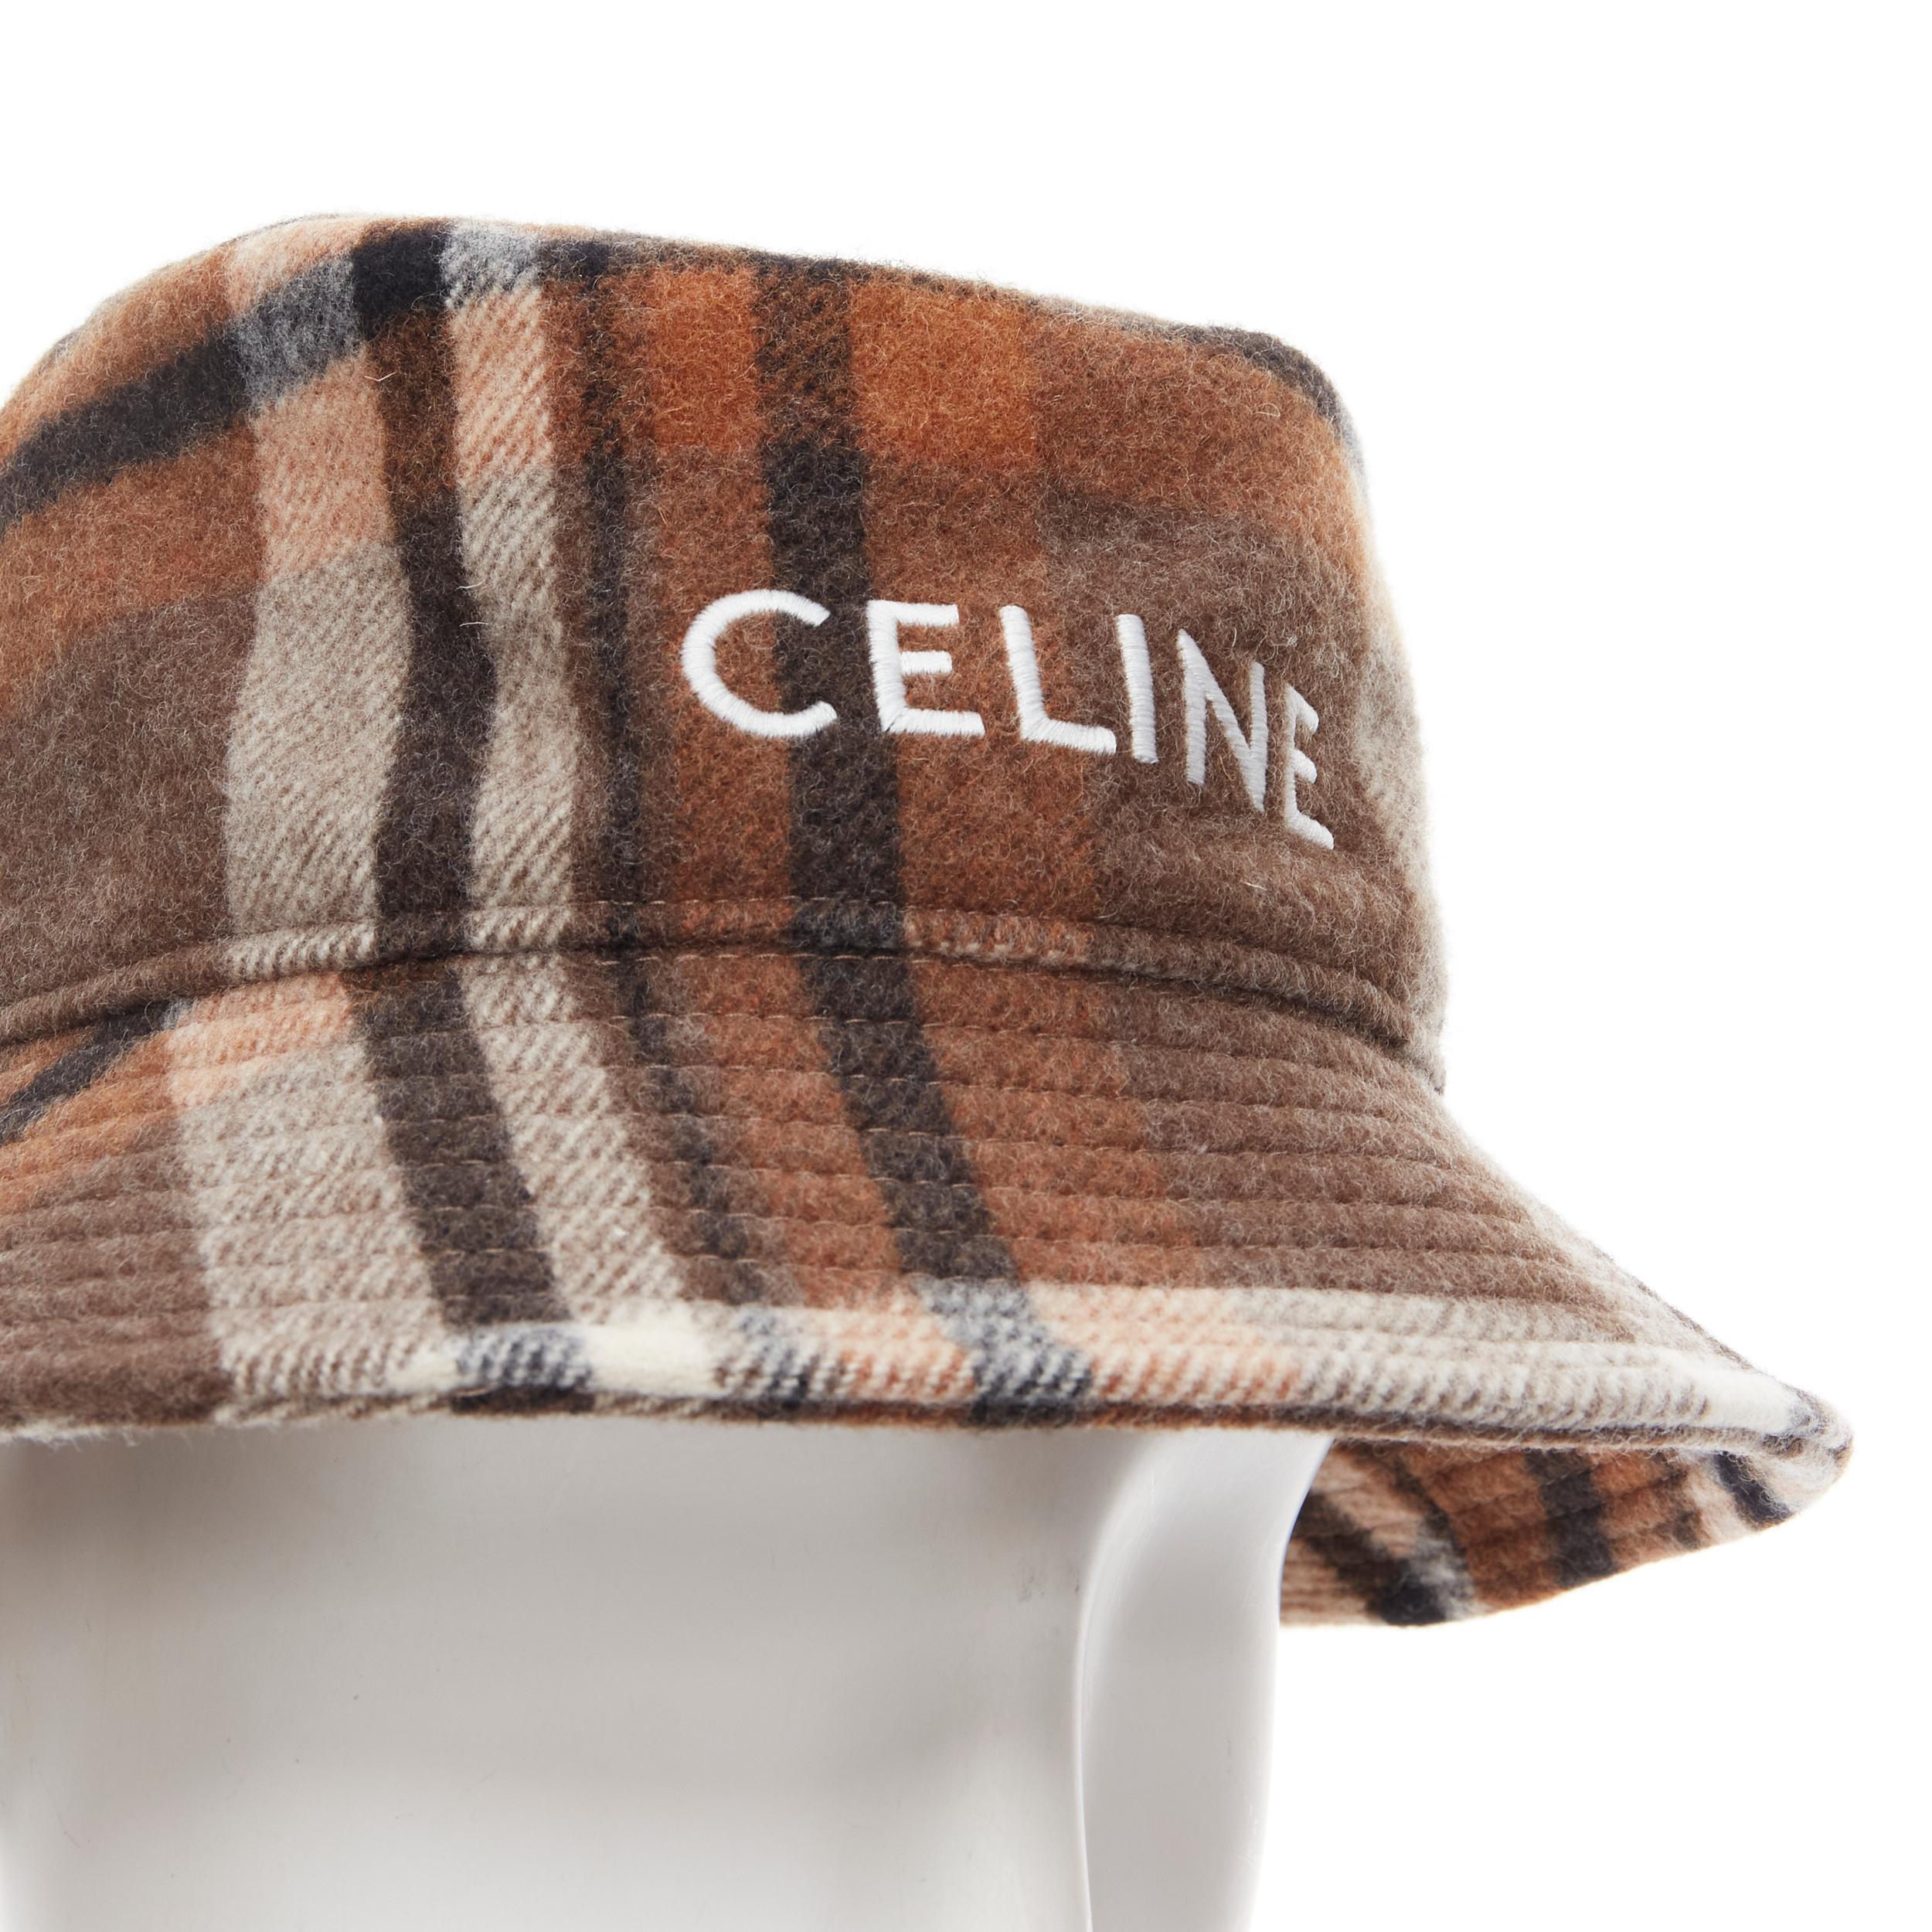 new CELINE Hedi Slimane brown check wool felt logo embroidery bucket hat M 57cm 
Reference: MELK/A00160 
Brand: Celine 
Designer: Hedi Slimane 
Material: Wool 
Color: Brown 
Pattern: Check 
Made in: France 

CONDITION: 
Condition: New with tags.